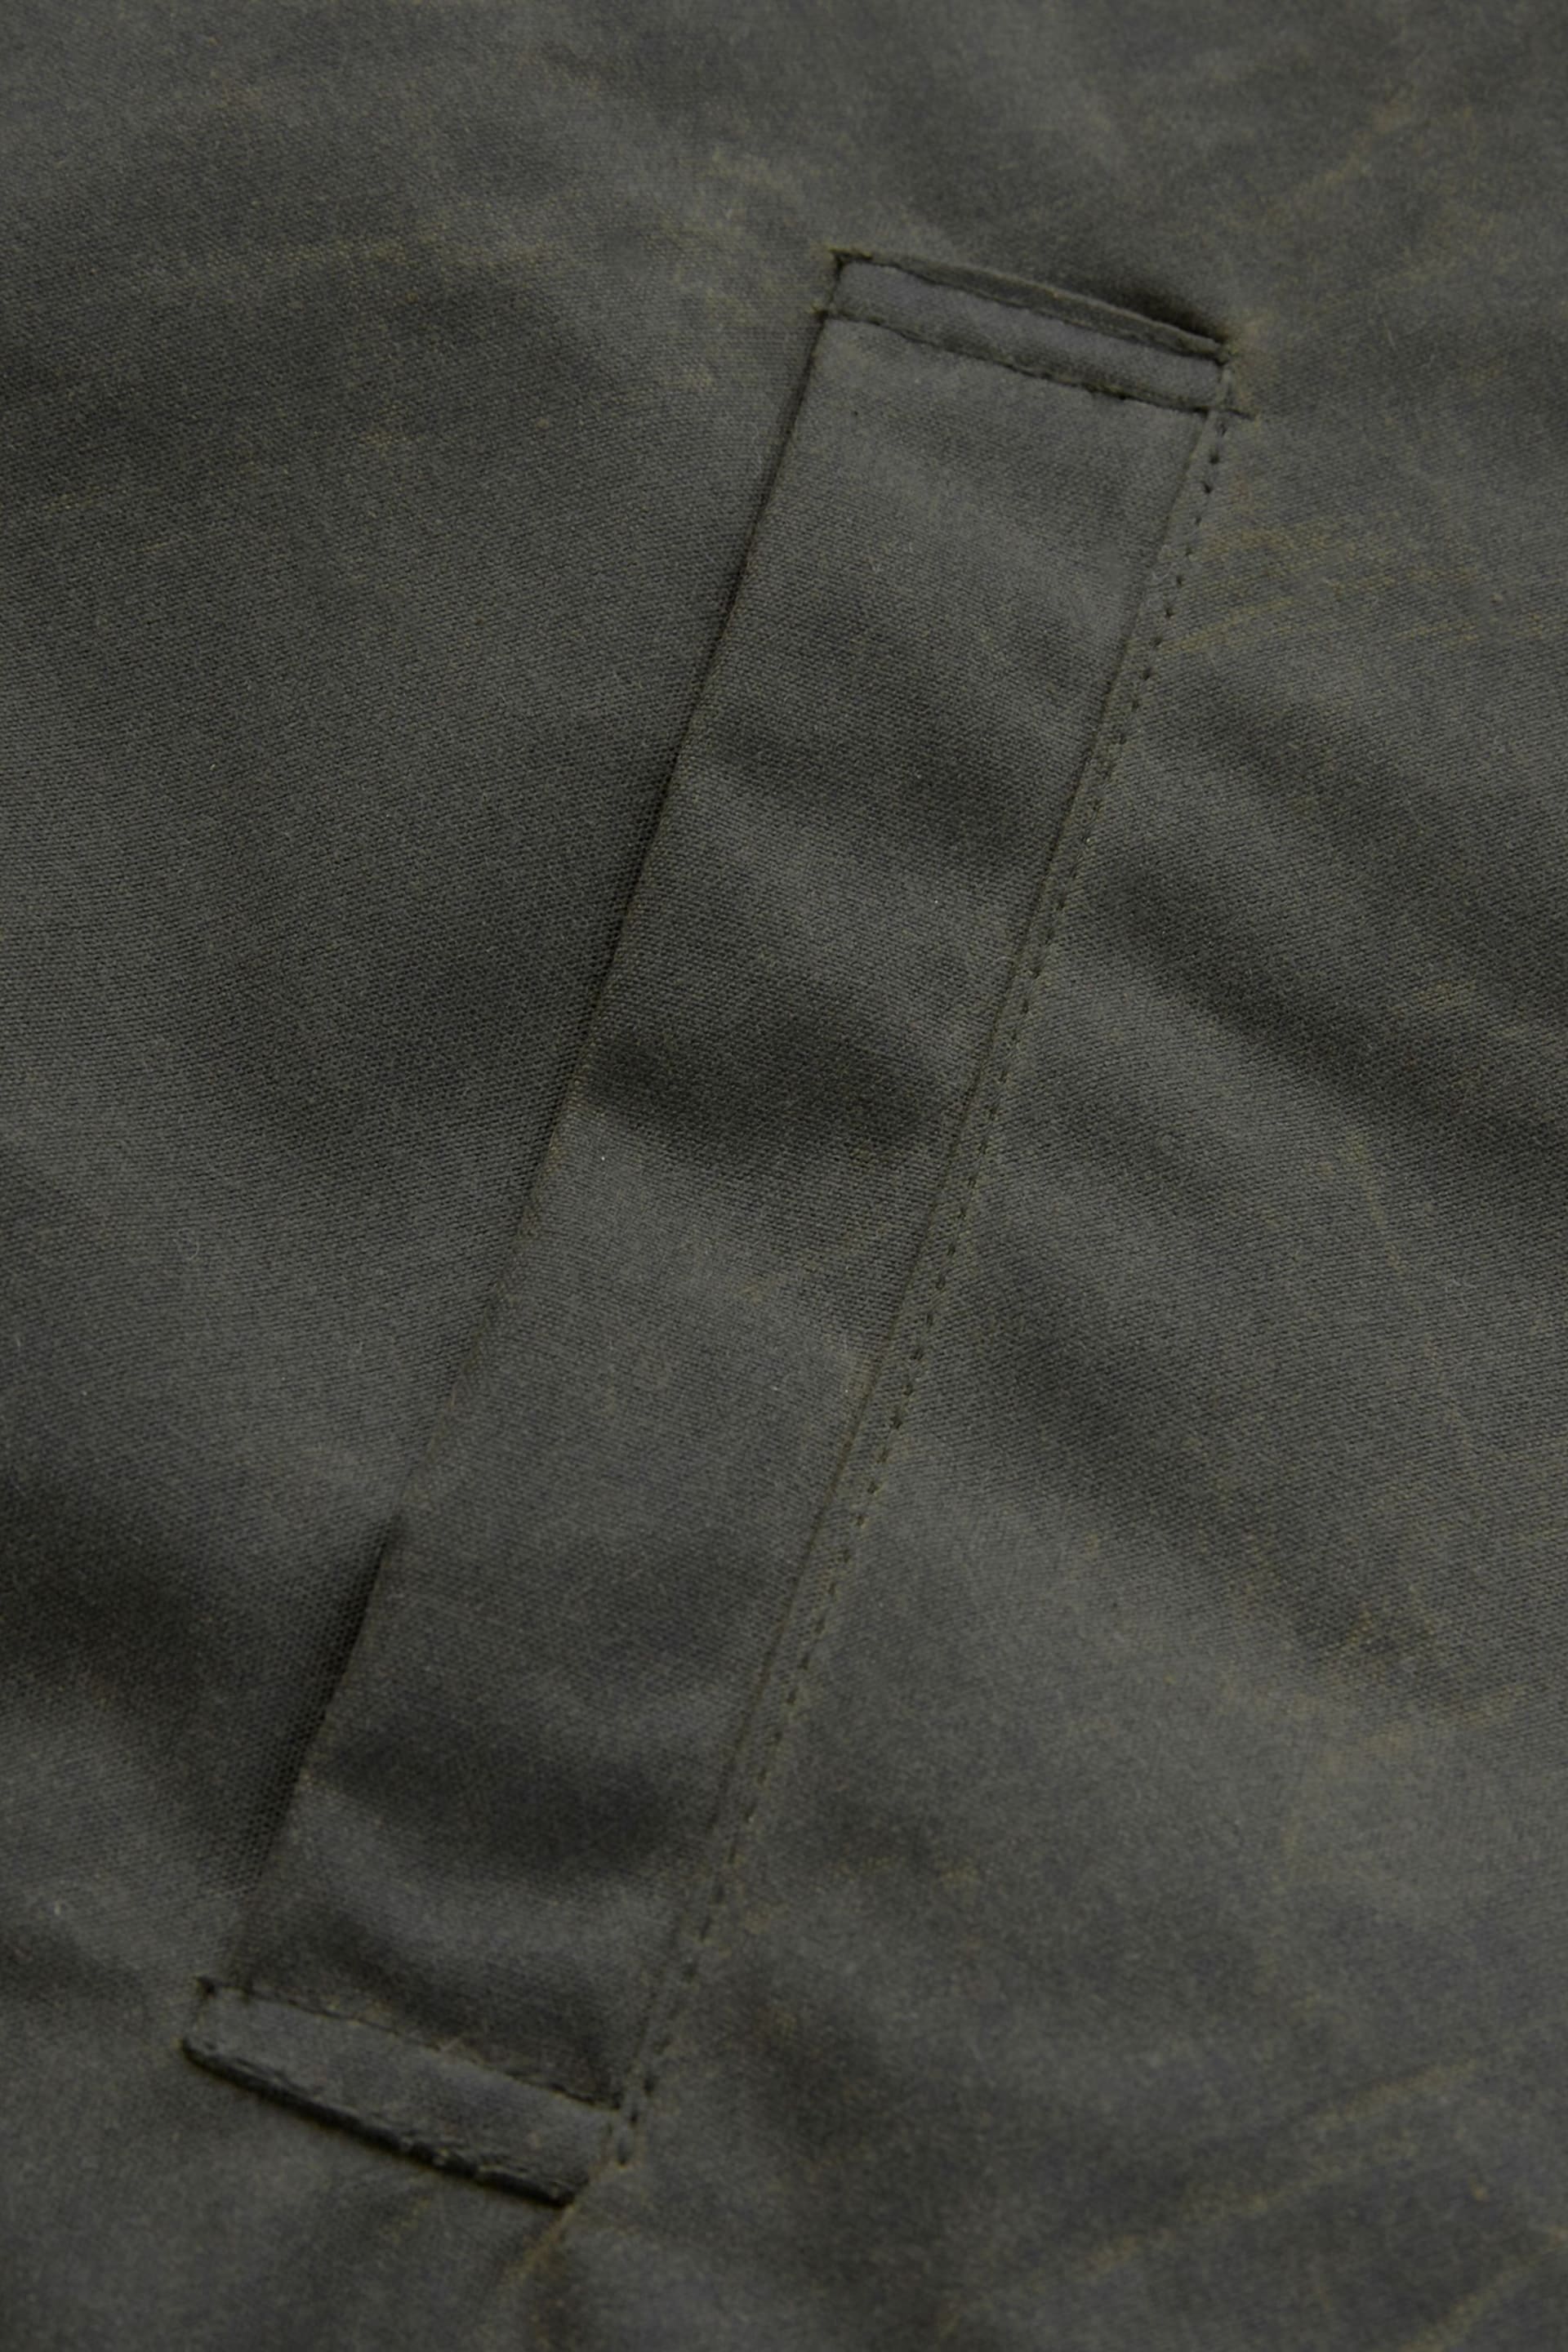 Celtic & Co. Green Wax Cotton Overshirt - Image 8 of 8